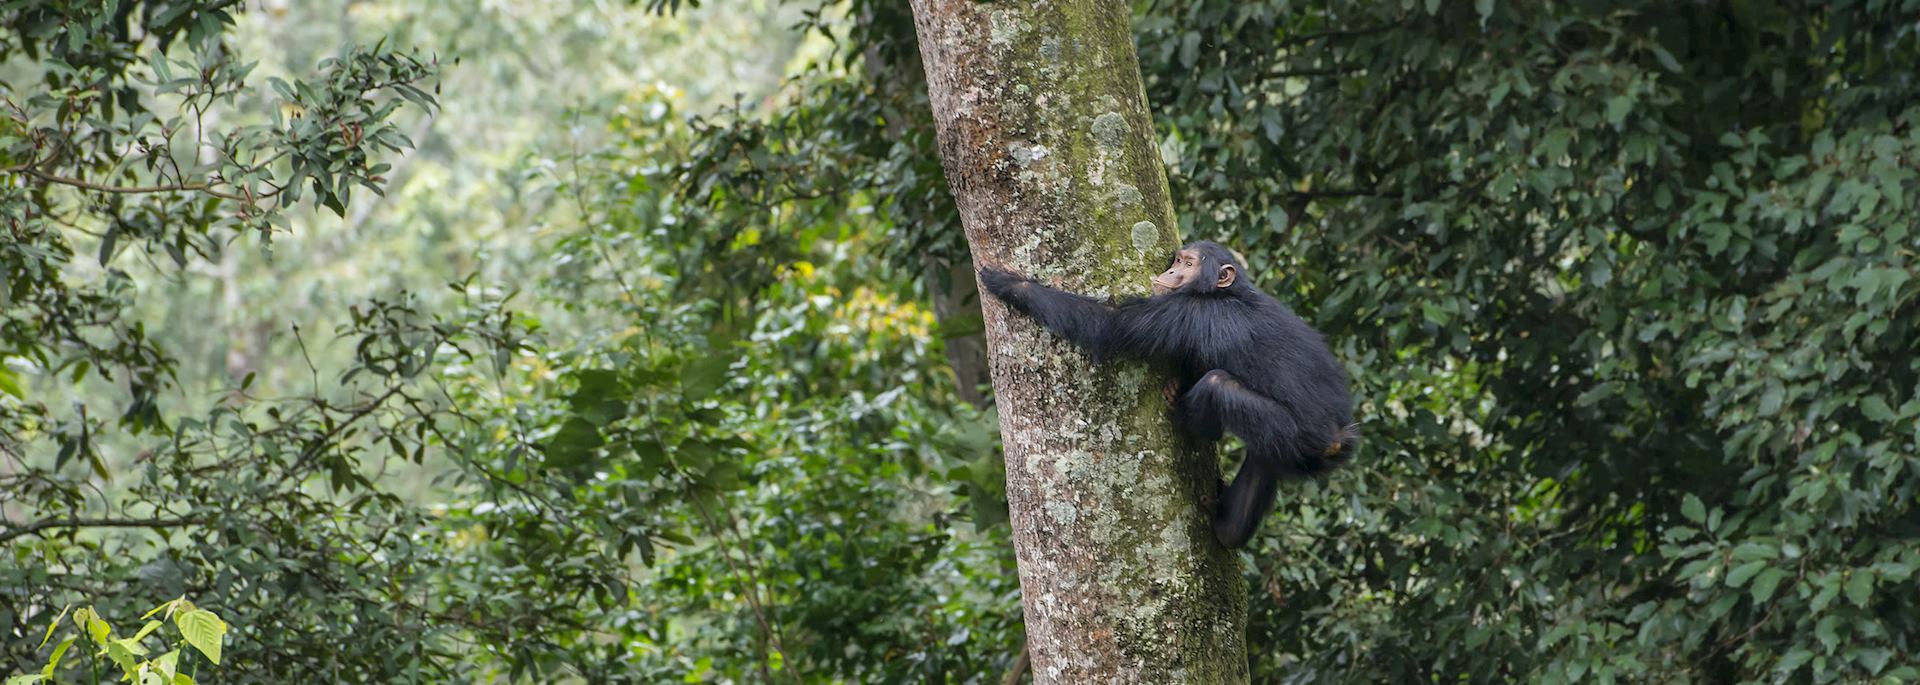 Chimpanzee in a tree, Nyungwe Forest